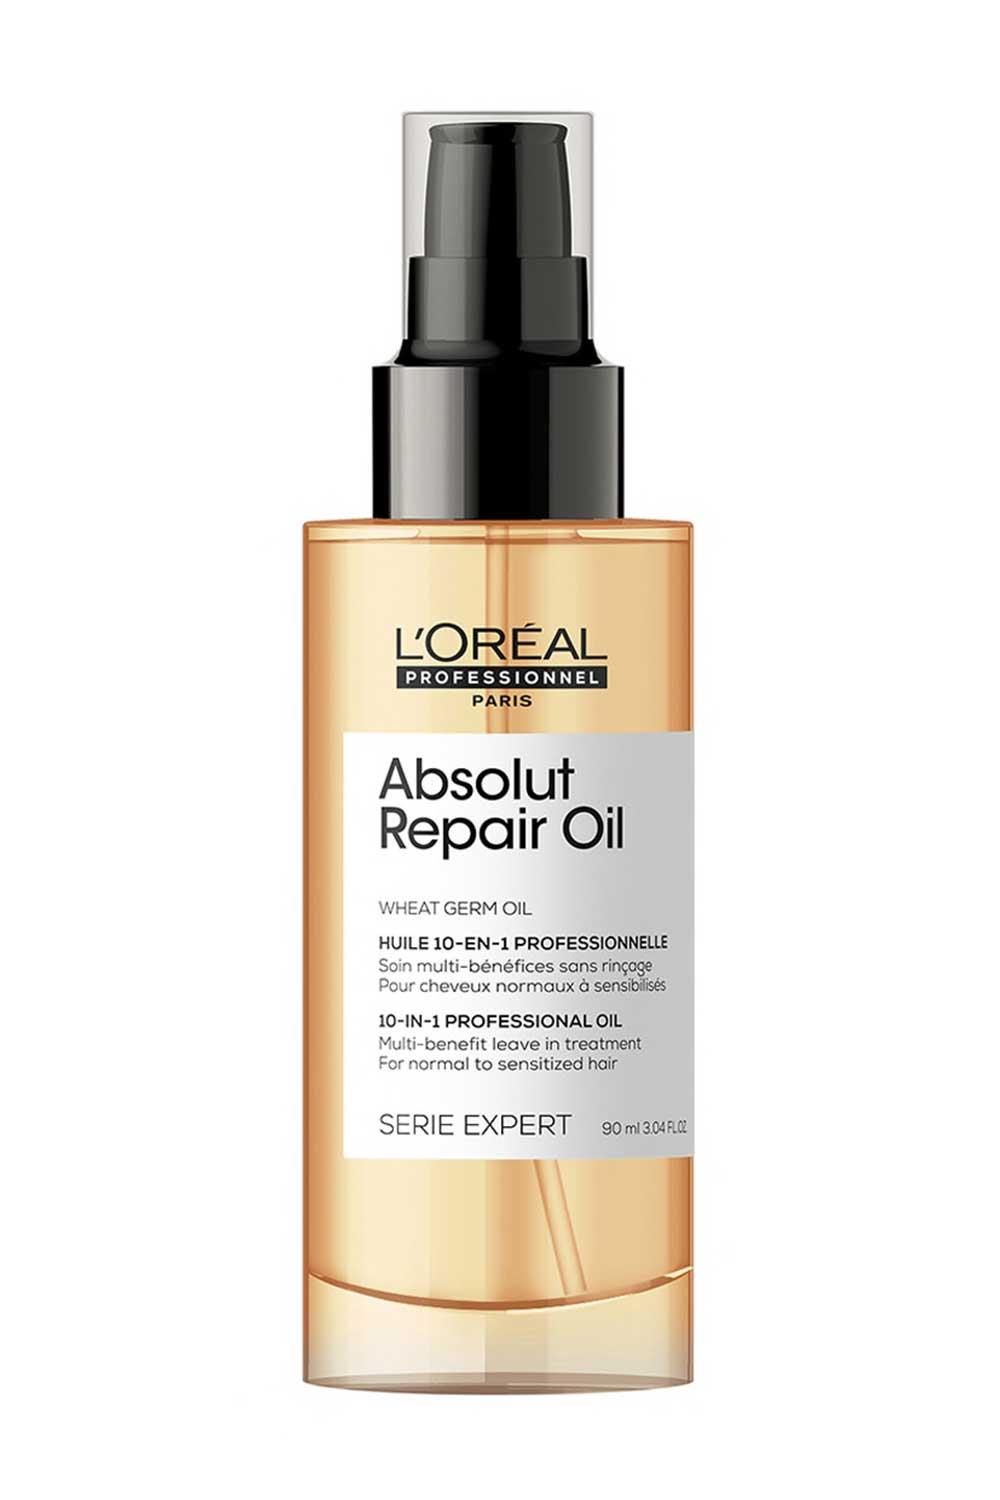 Lorealpro. Aceite Absolut Repair 90 ml L'Oreal Professionnel